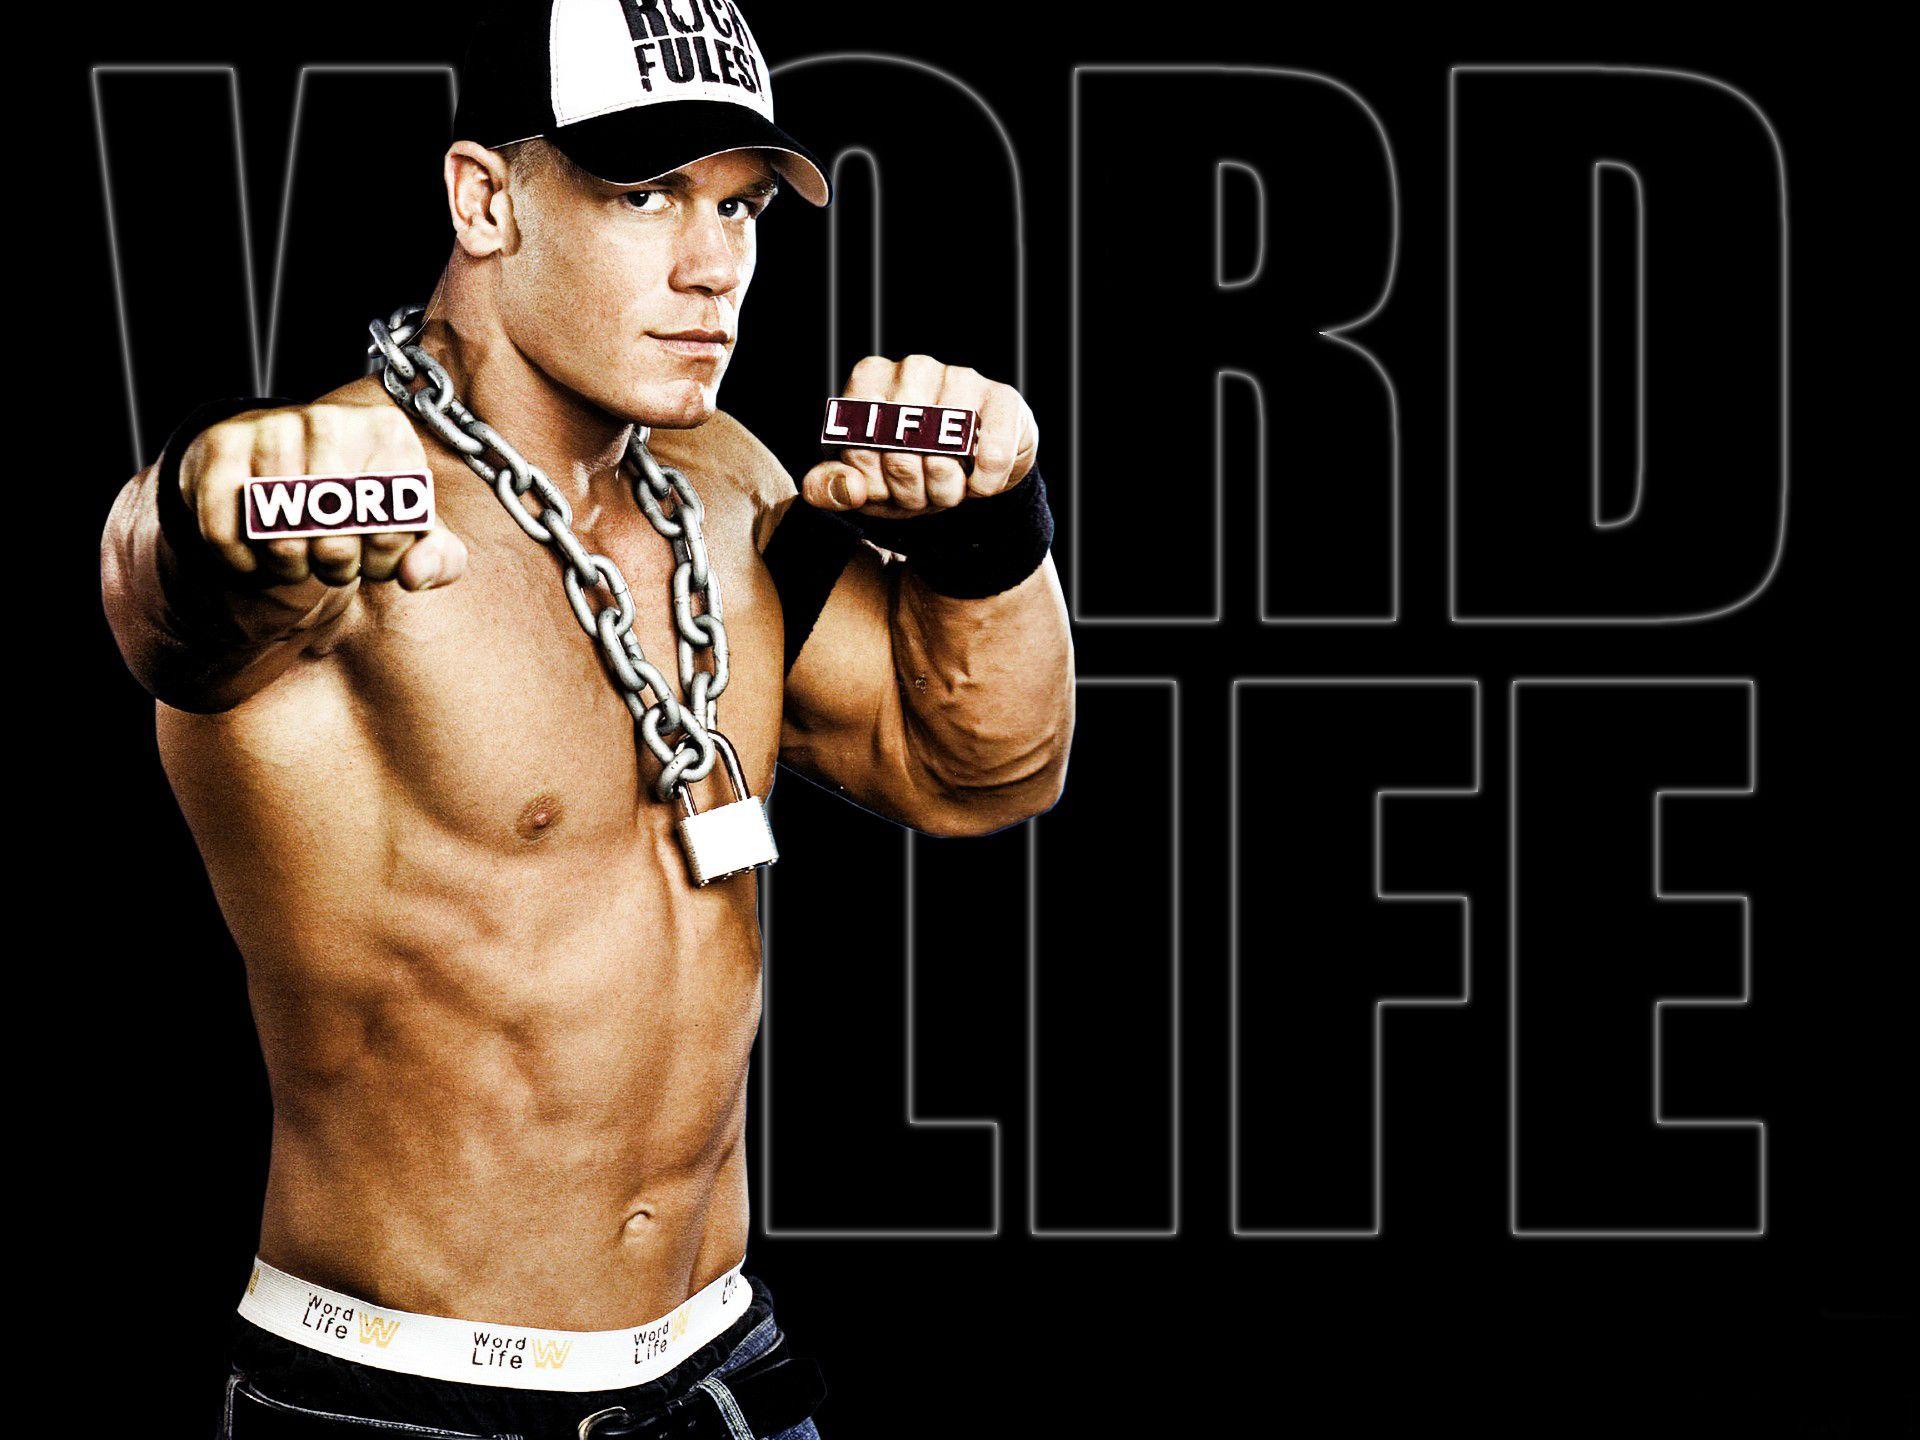 Awesome John Cena Picture HD Wallpaper Free Download